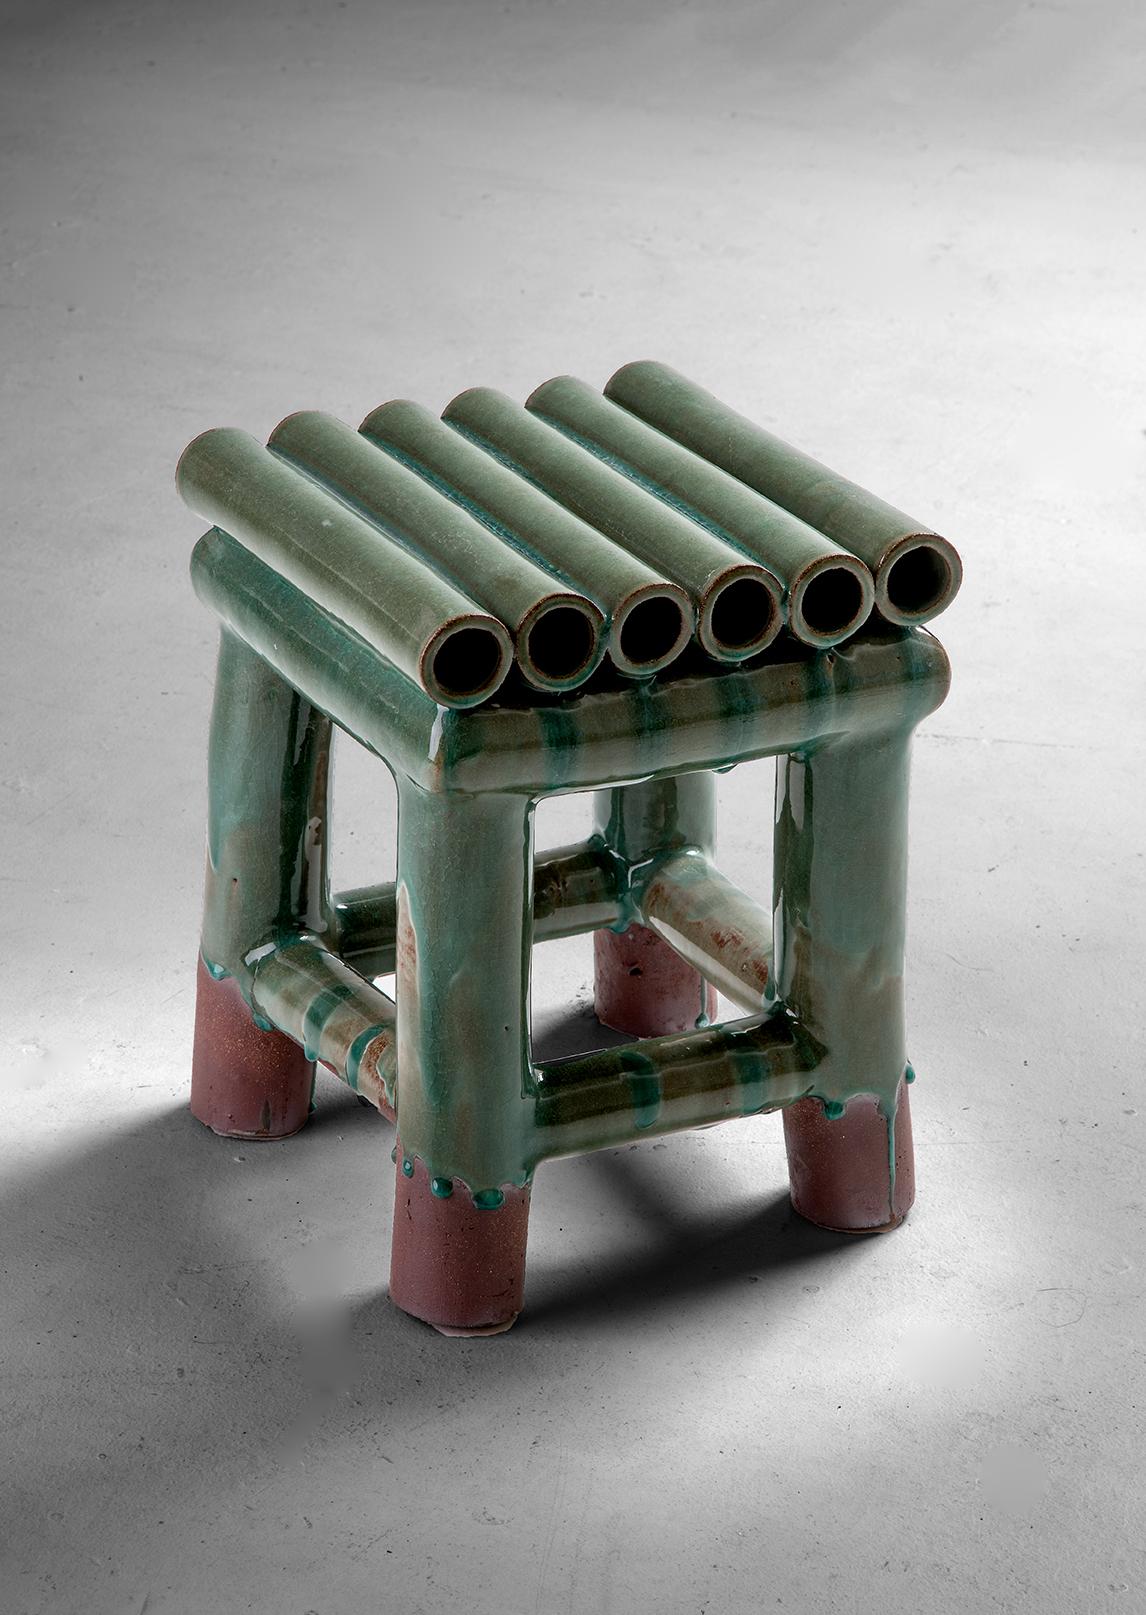 Green stool by Milan Pekar
Dimensions: 30 x 30 x 40 cm
Materials: Stoneware with salt glaze

Handmade in the Czech Republic. 
Also available in different colors.

Stoneware with salt glaze.

Established own studio August 2009 – Focus mainly